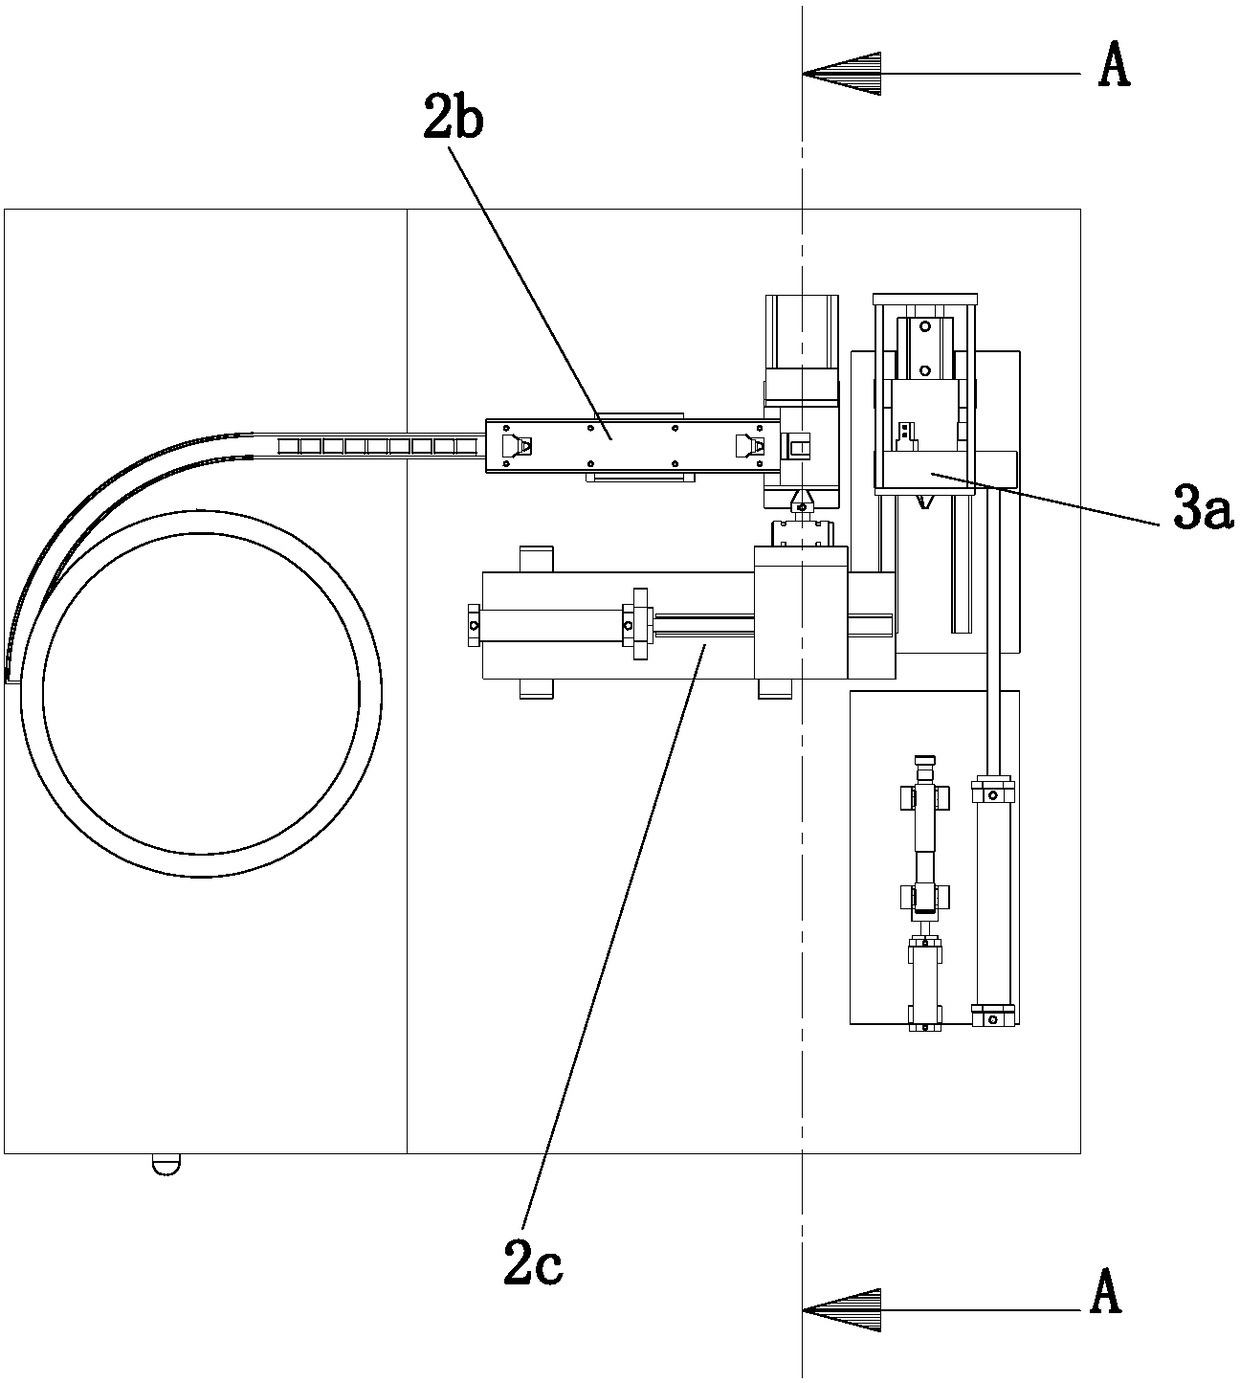 Assembling method of sealing ring of shaft rod in finisher on numerical control lathe